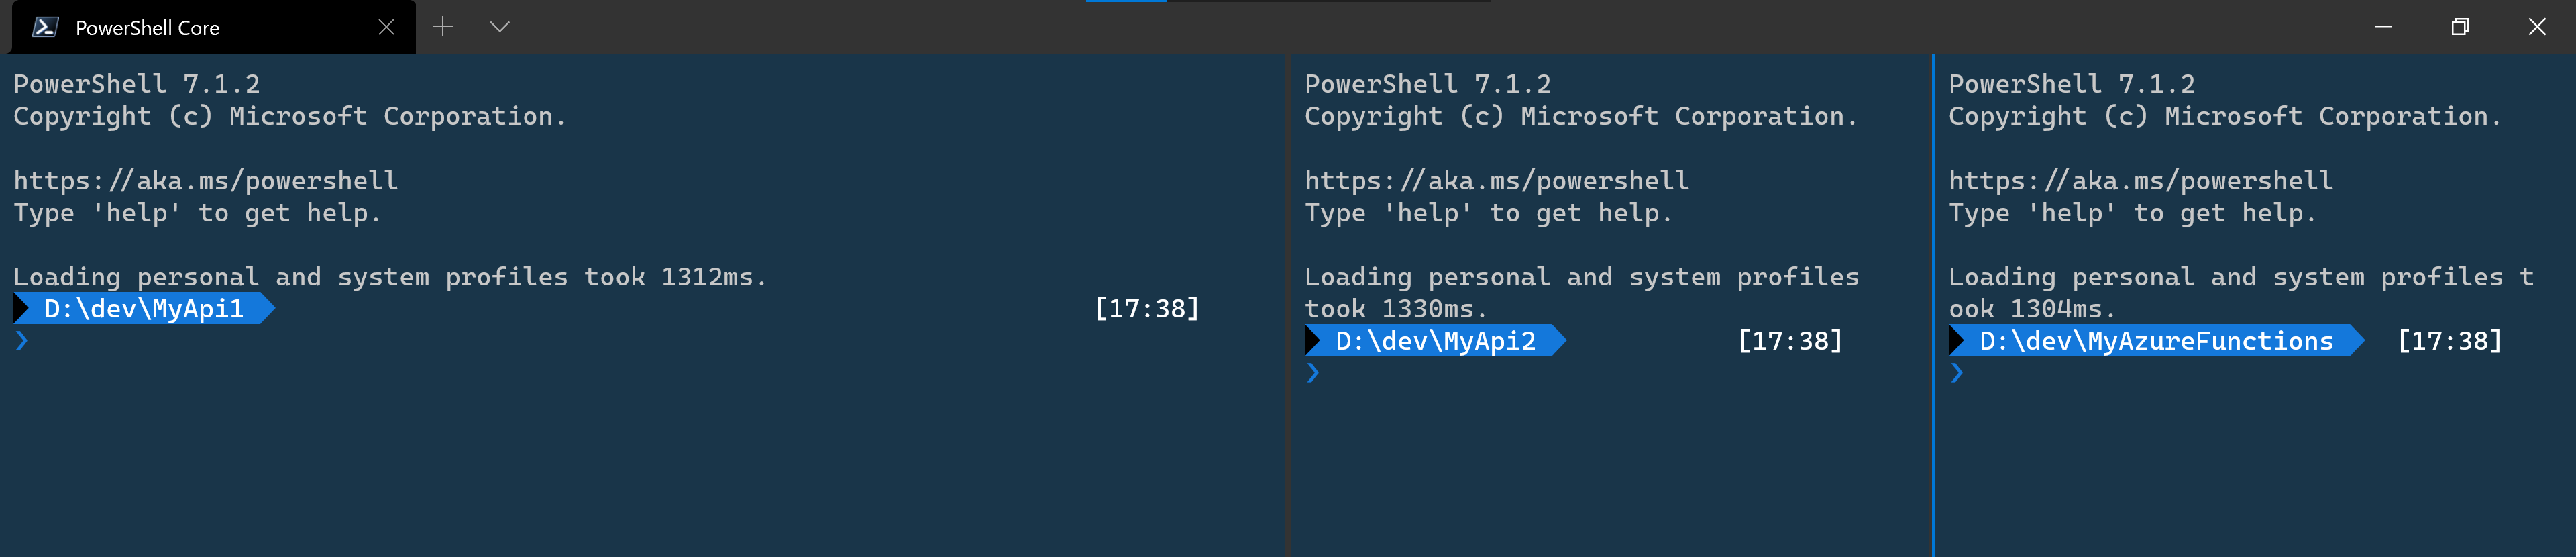 w092021tips_terminal_1.png